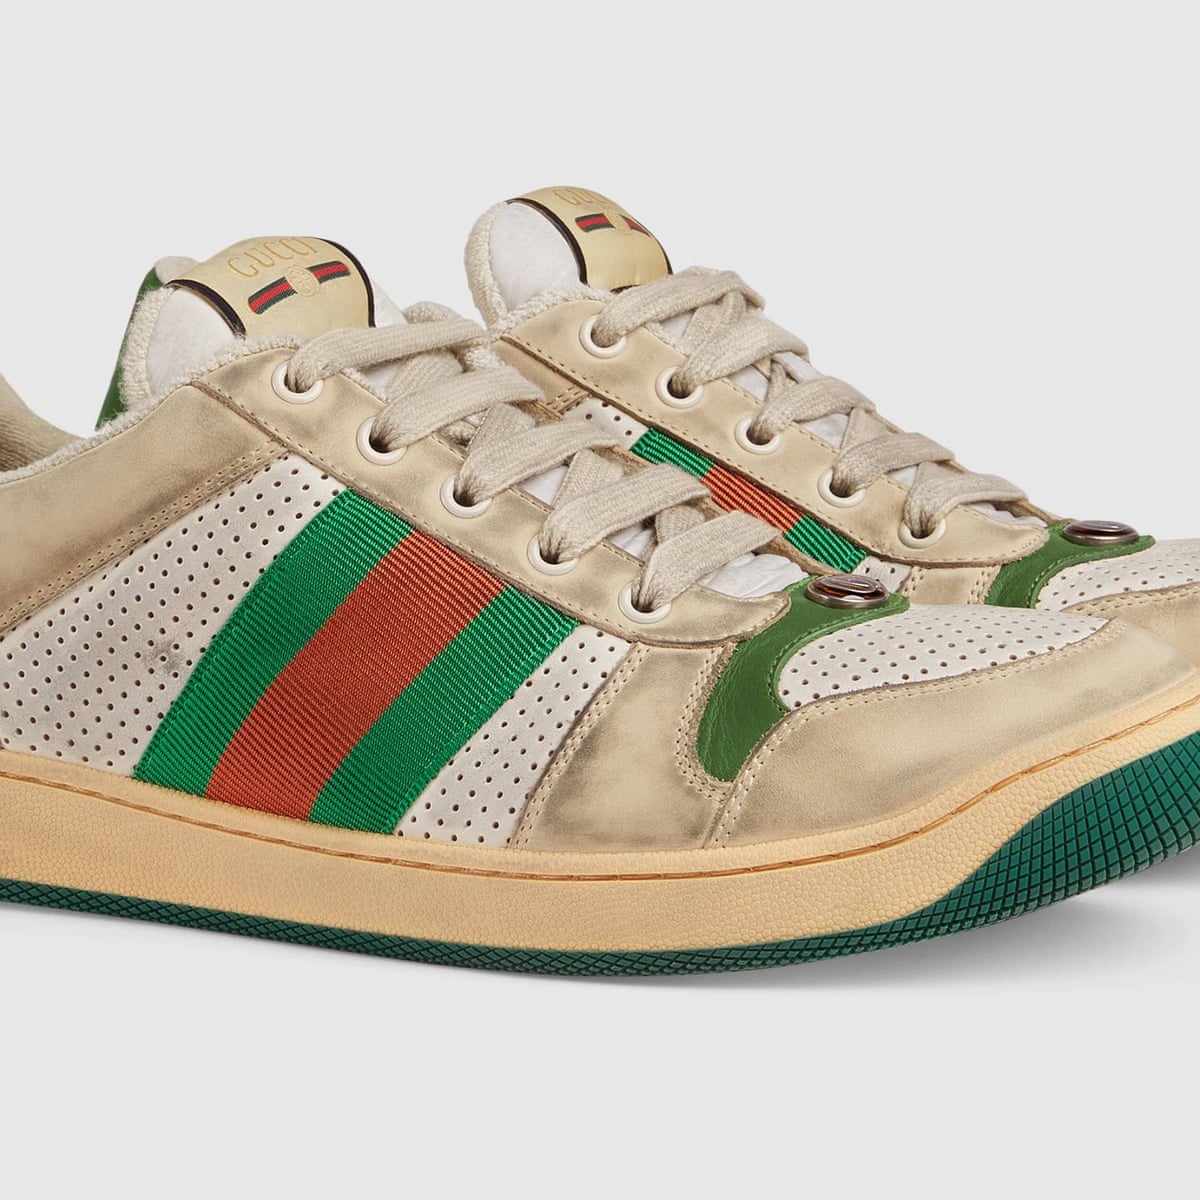 Who would pay £615 for a pair of dirty Gucci trainers? | Gucci | The  Guardian